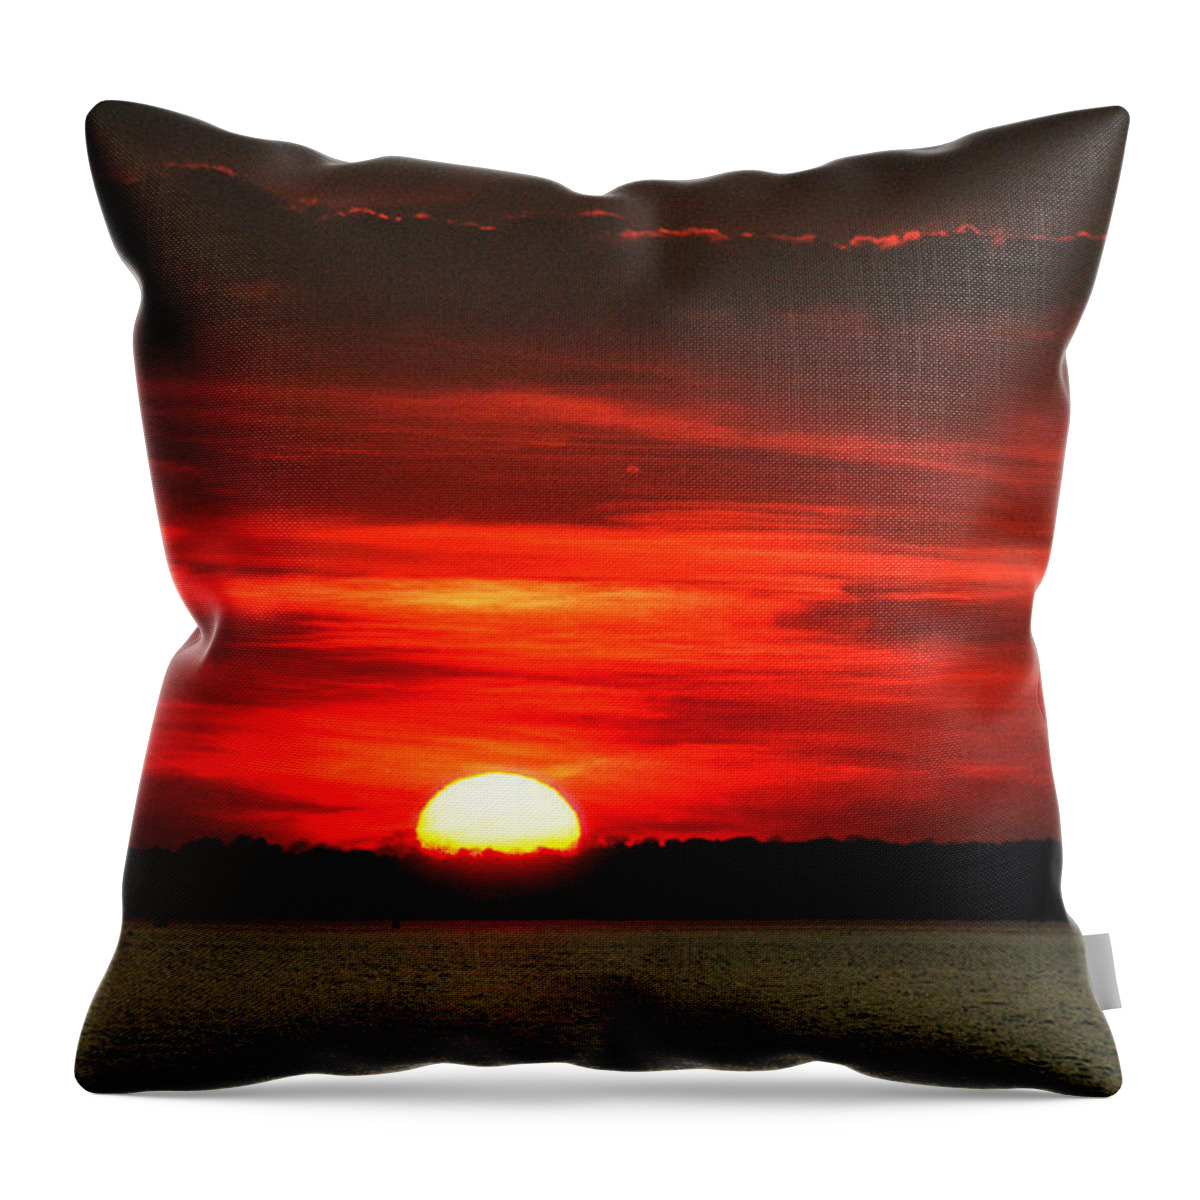 Sunset Throw Pillow featuring the photograph Sunset Over Long Island by William Selander